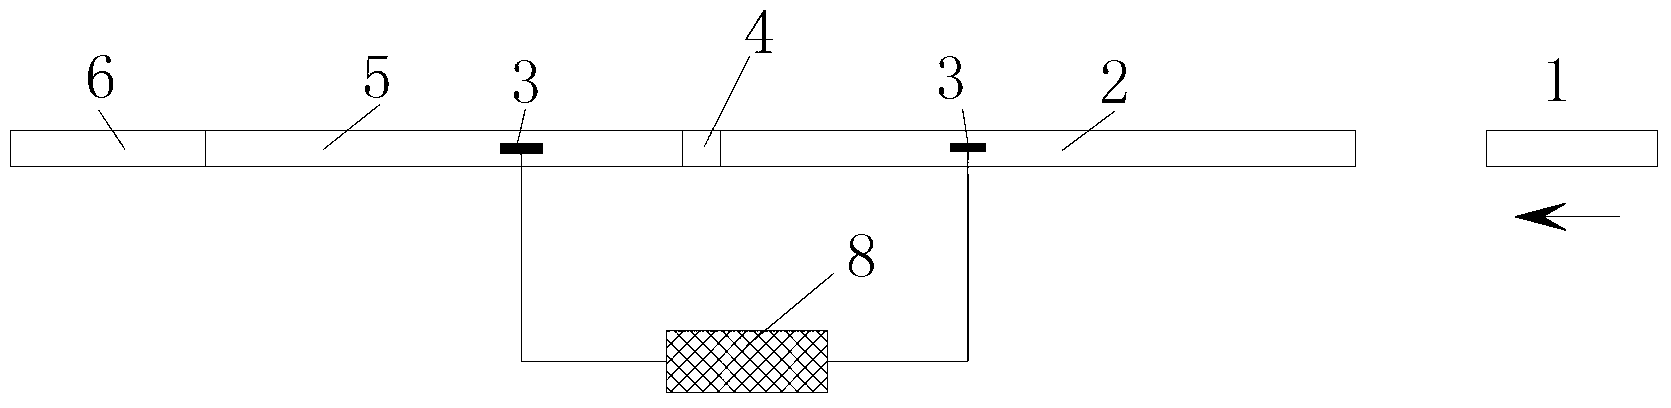 Gas sealing device and test method for coal rock impact test